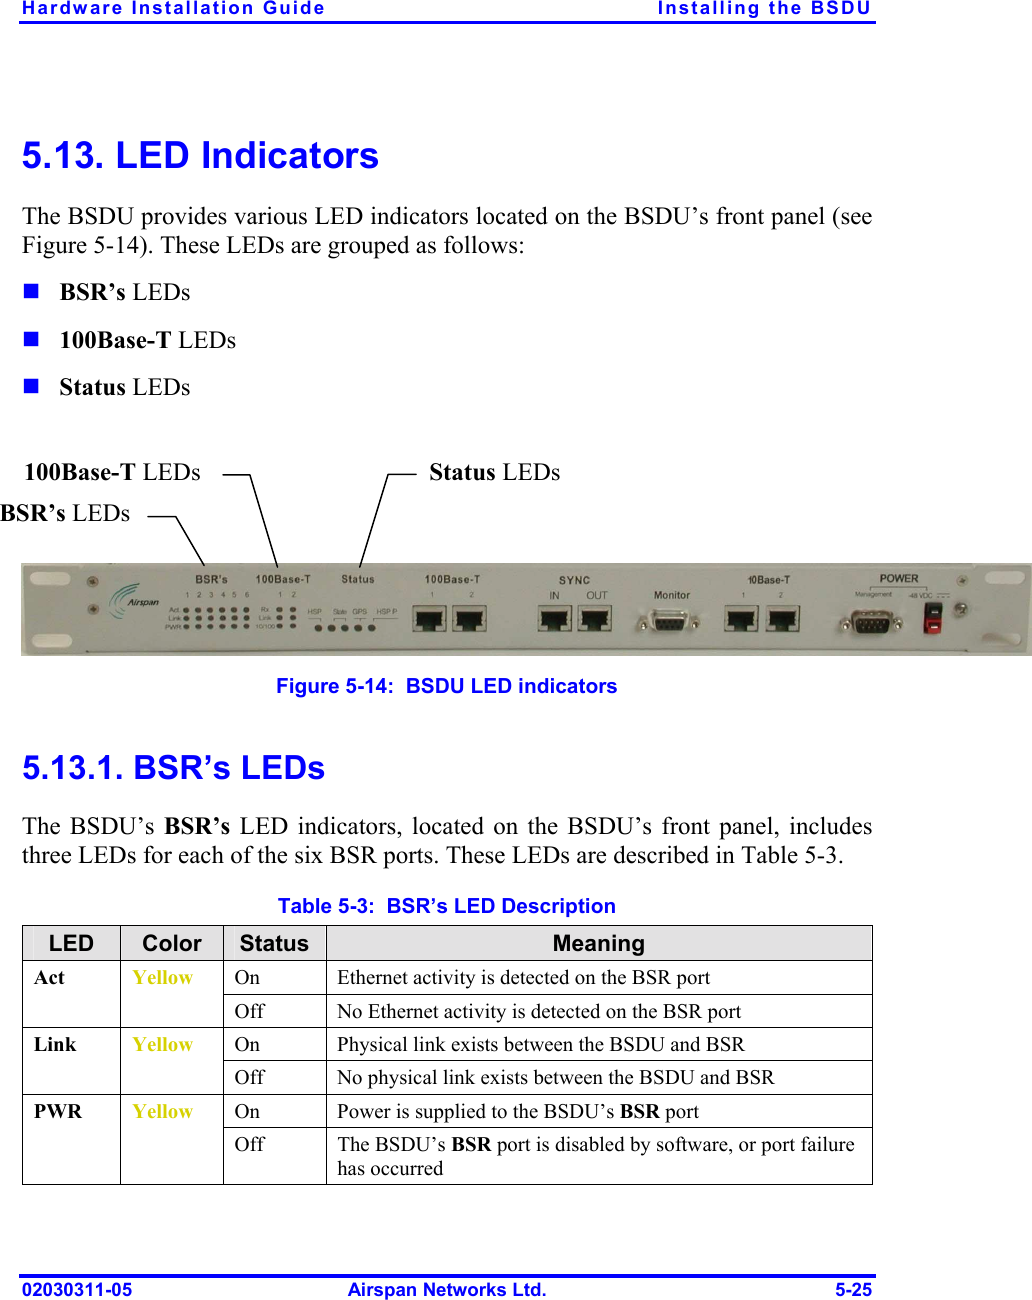 Hardware Installation Guide  Installing the BSDU 02030311-05  Airspan Networks Ltd.  5-25 5.13. LED Indicators The BSDU provides various LED indicators located on the BSDU’s front panel (see Figure  5-14). These LEDs are grouped as follows: ! BSR’s LEDs ! 100Base-T LEDs ! Status LEDs       Figure  5-14:  BSDU LED indicators 5.13.1. BSR’s LEDs The BSDU’s BSR’s LED indicators, located on the BSDU’s front panel, includes three LEDs for each of the six BSR ports. These LEDs are described in Table  5-3. Table  5-3:  BSR’s LED Description LED  Color  Status  Meaning On  Ethernet activity is detected on the BSR port Act  Yellow Off  No Ethernet activity is detected on the BSR port On  Physical link exists between the BSDU and BSR Link  Yellow Off  No physical link exists between the BSDU and BSR On  Power is supplied to the BSDU’s BSR port PWR  Yellow Off  The BSDU’s BSR port is disabled by software, or port failure has occurred BSR’s LEDs 100Base-T LEDs Status LEDs 